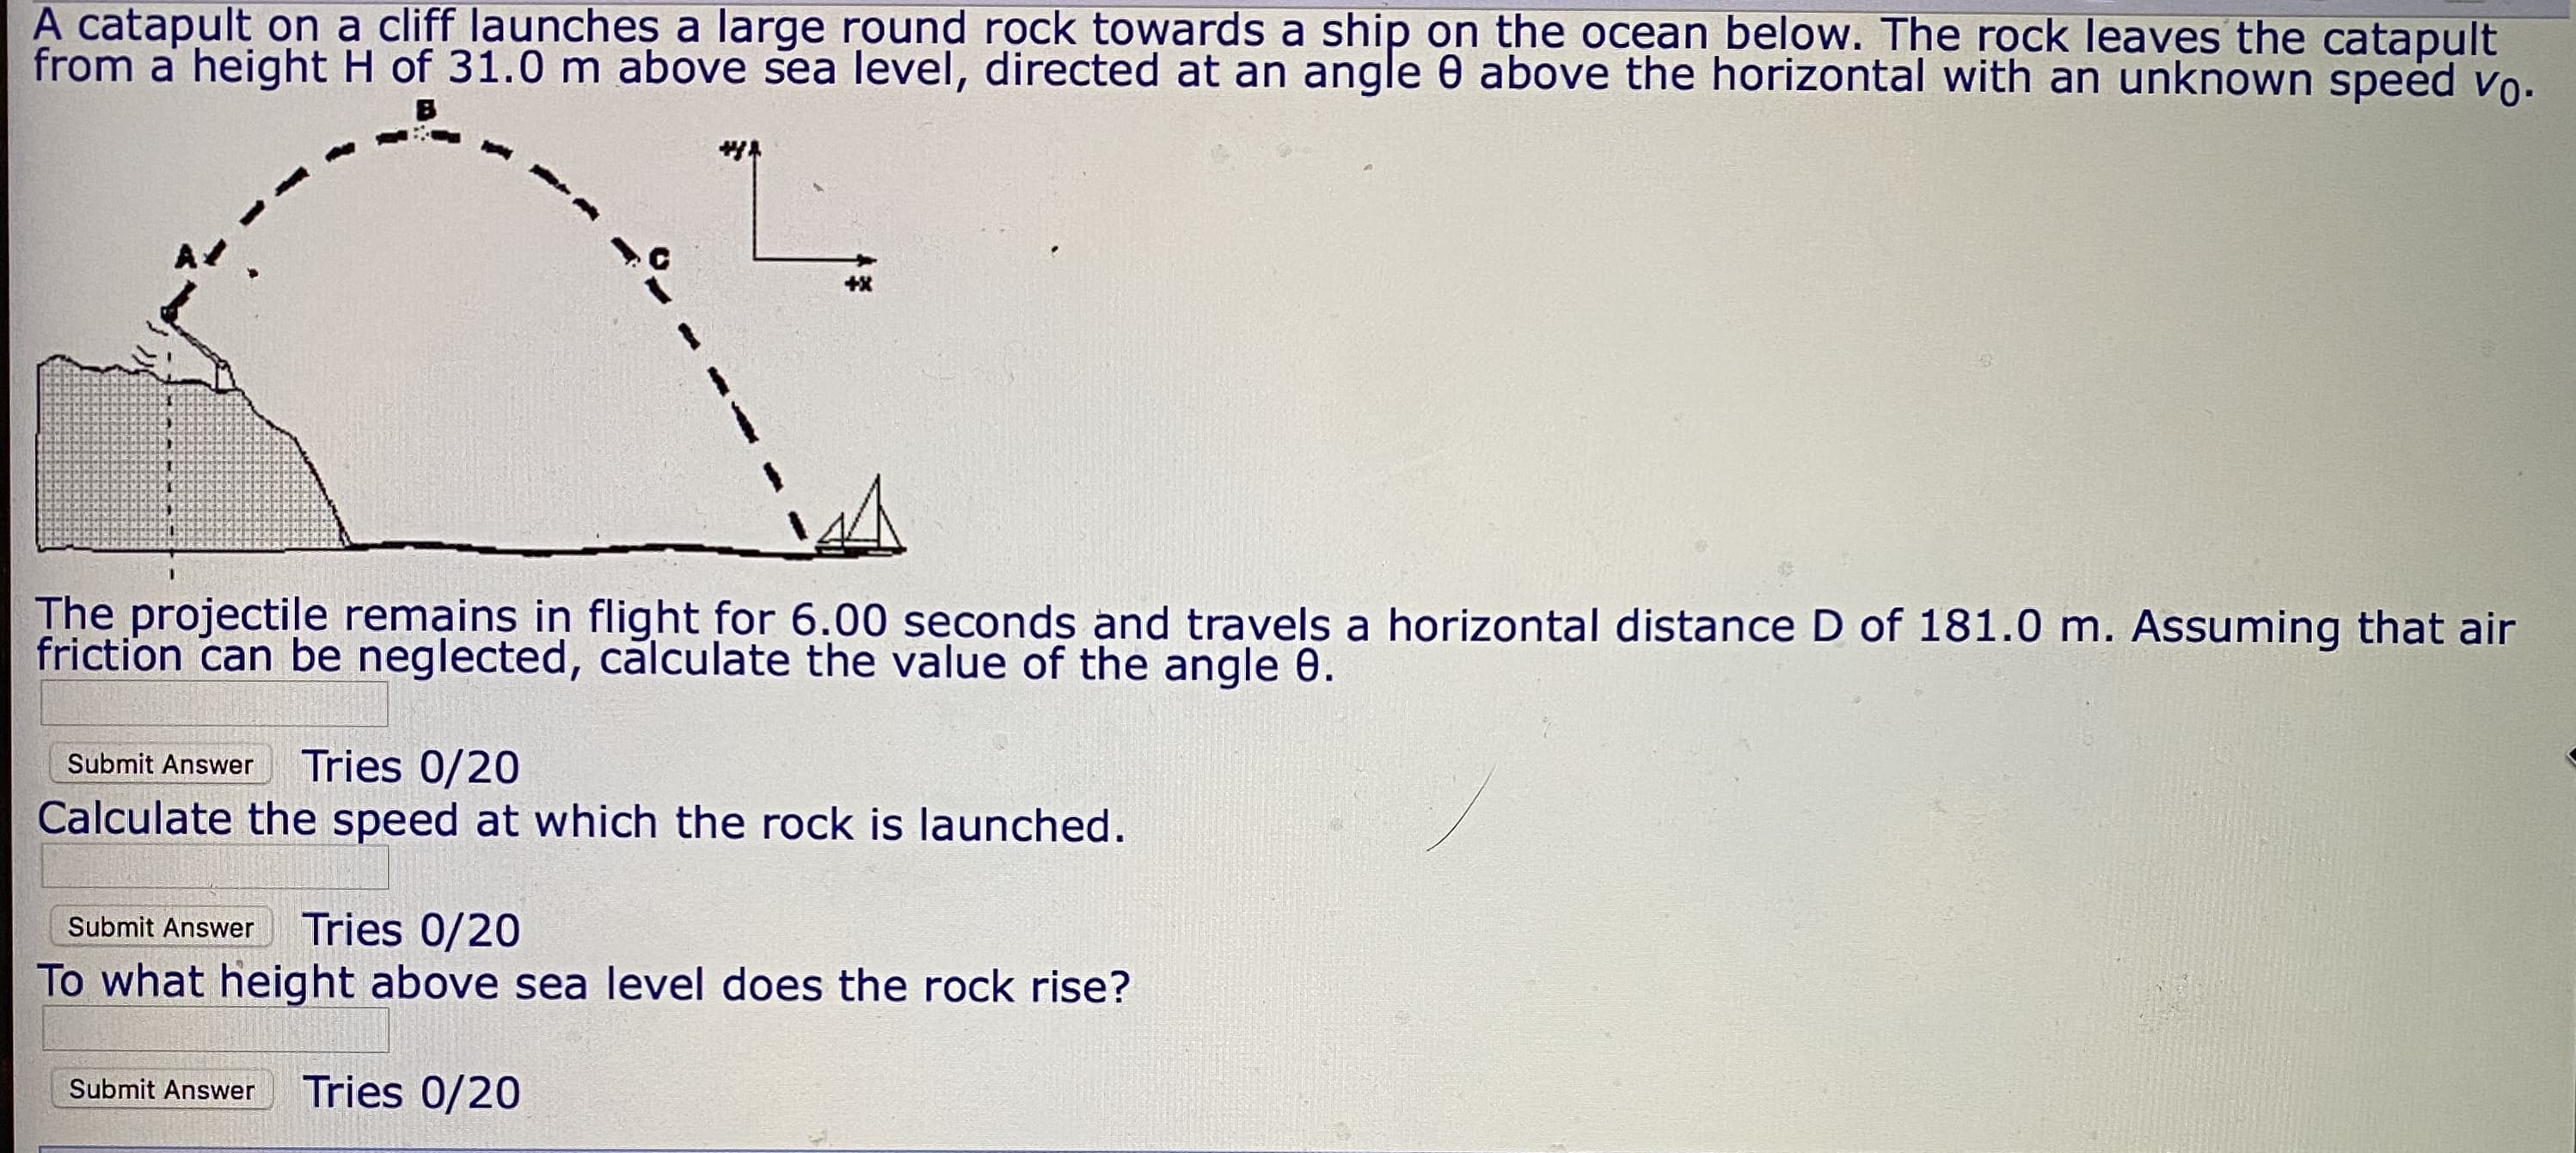 A catapult on a cliff launches a large round rock towards a ship on the ocean below. The rock leaves the catapult
from a height H of 31.0 m above sea level, directed at an angle 0 above the horizontal with an unknown speed vo.
